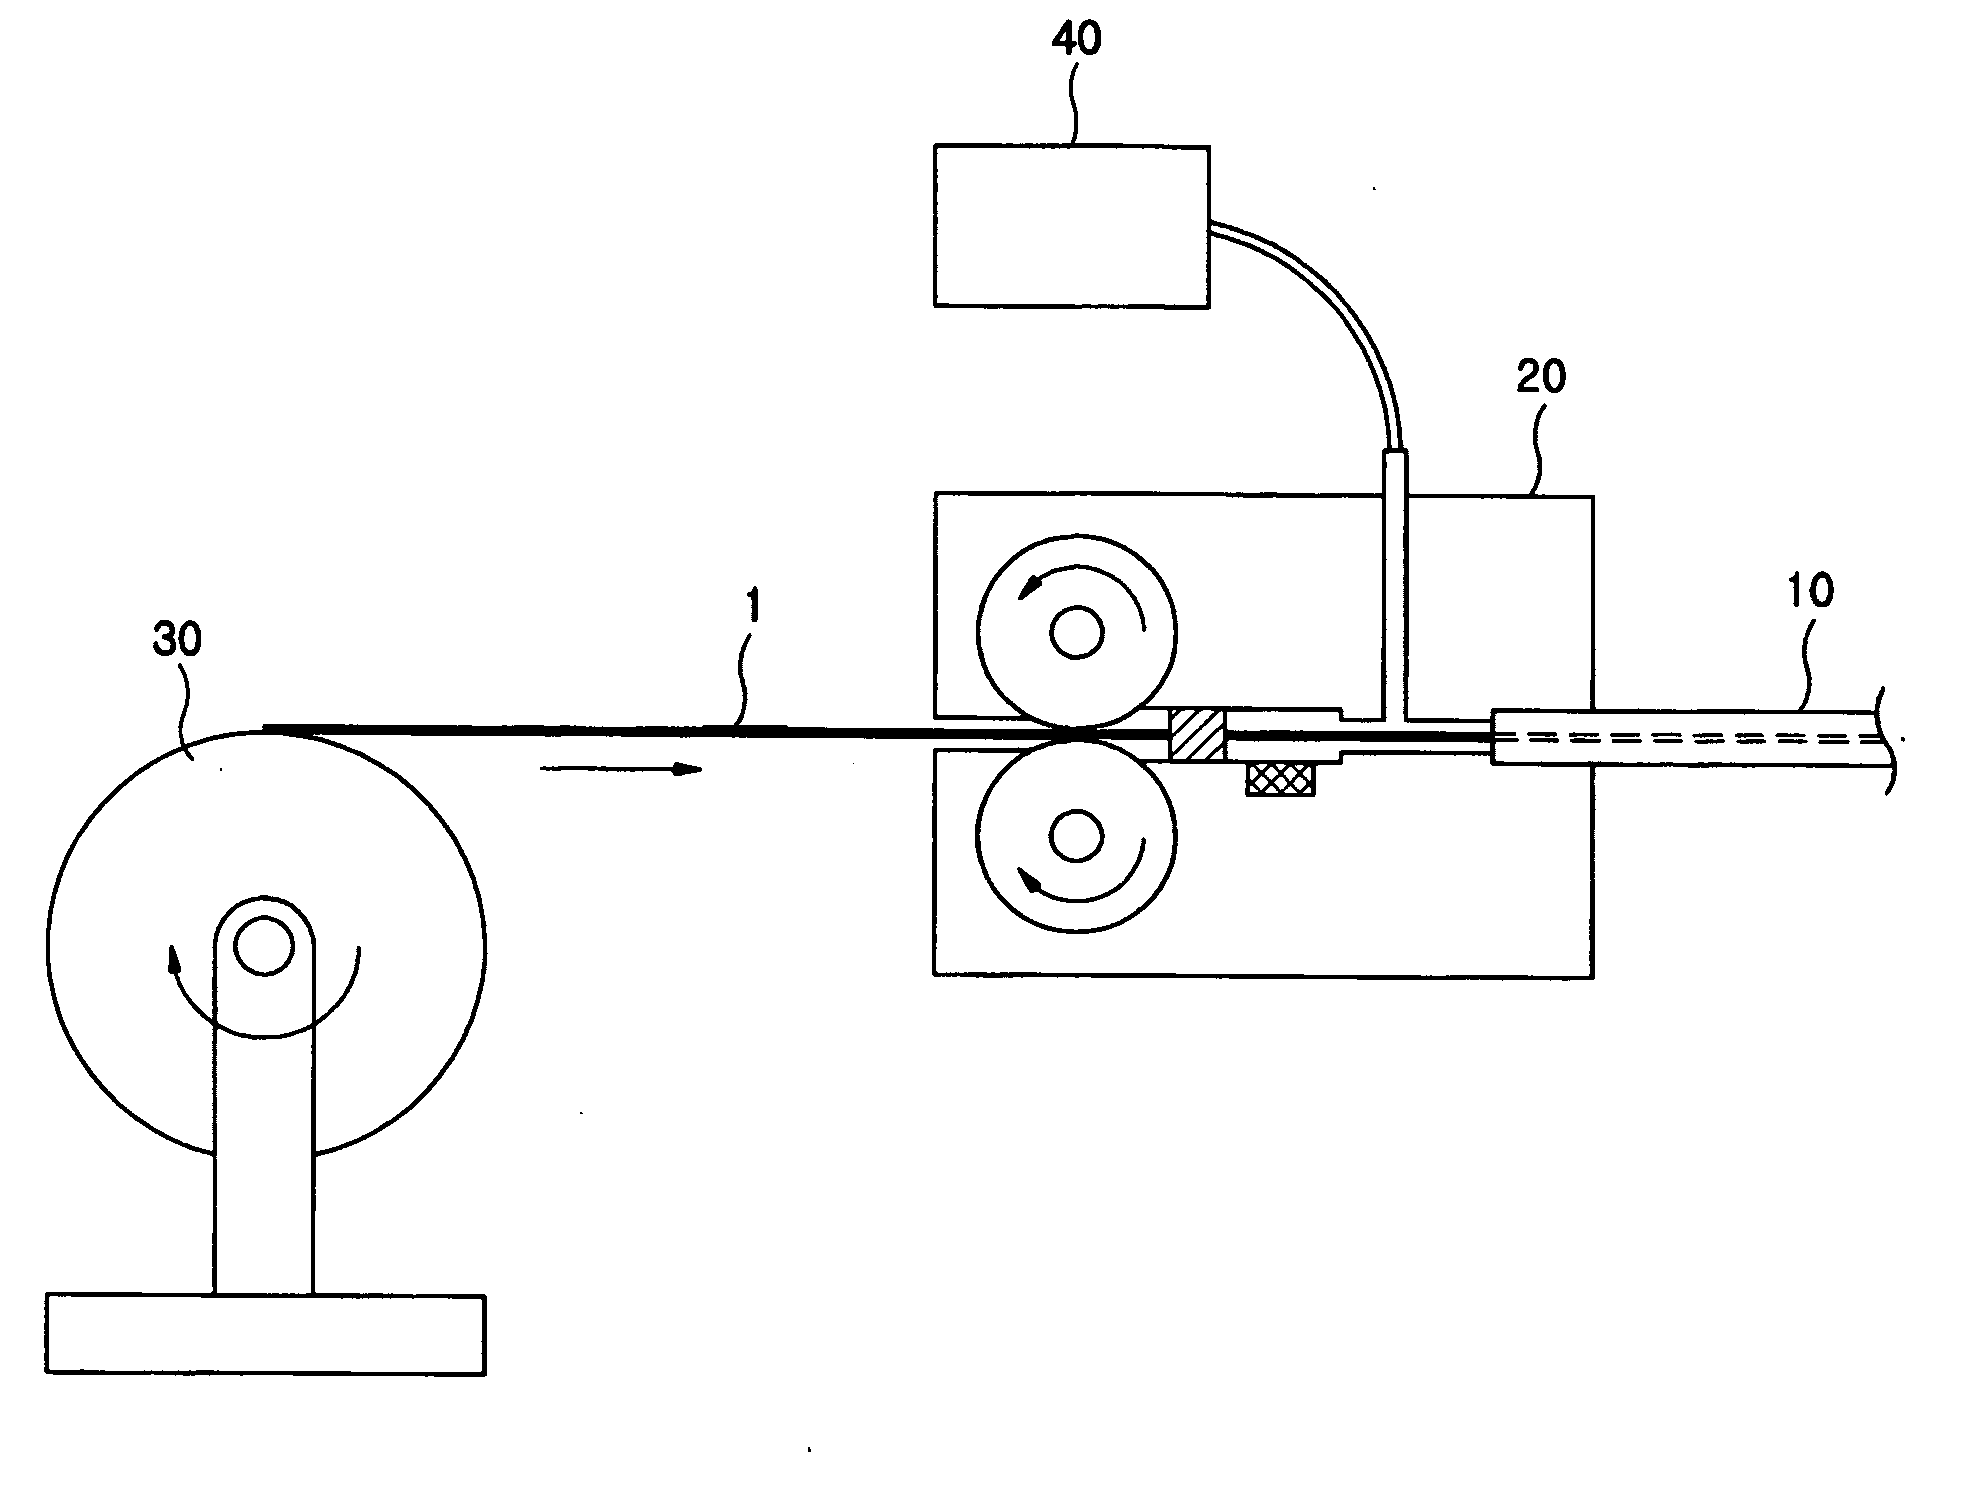 Tube for installing an optical fiber unit having a lubricous surface